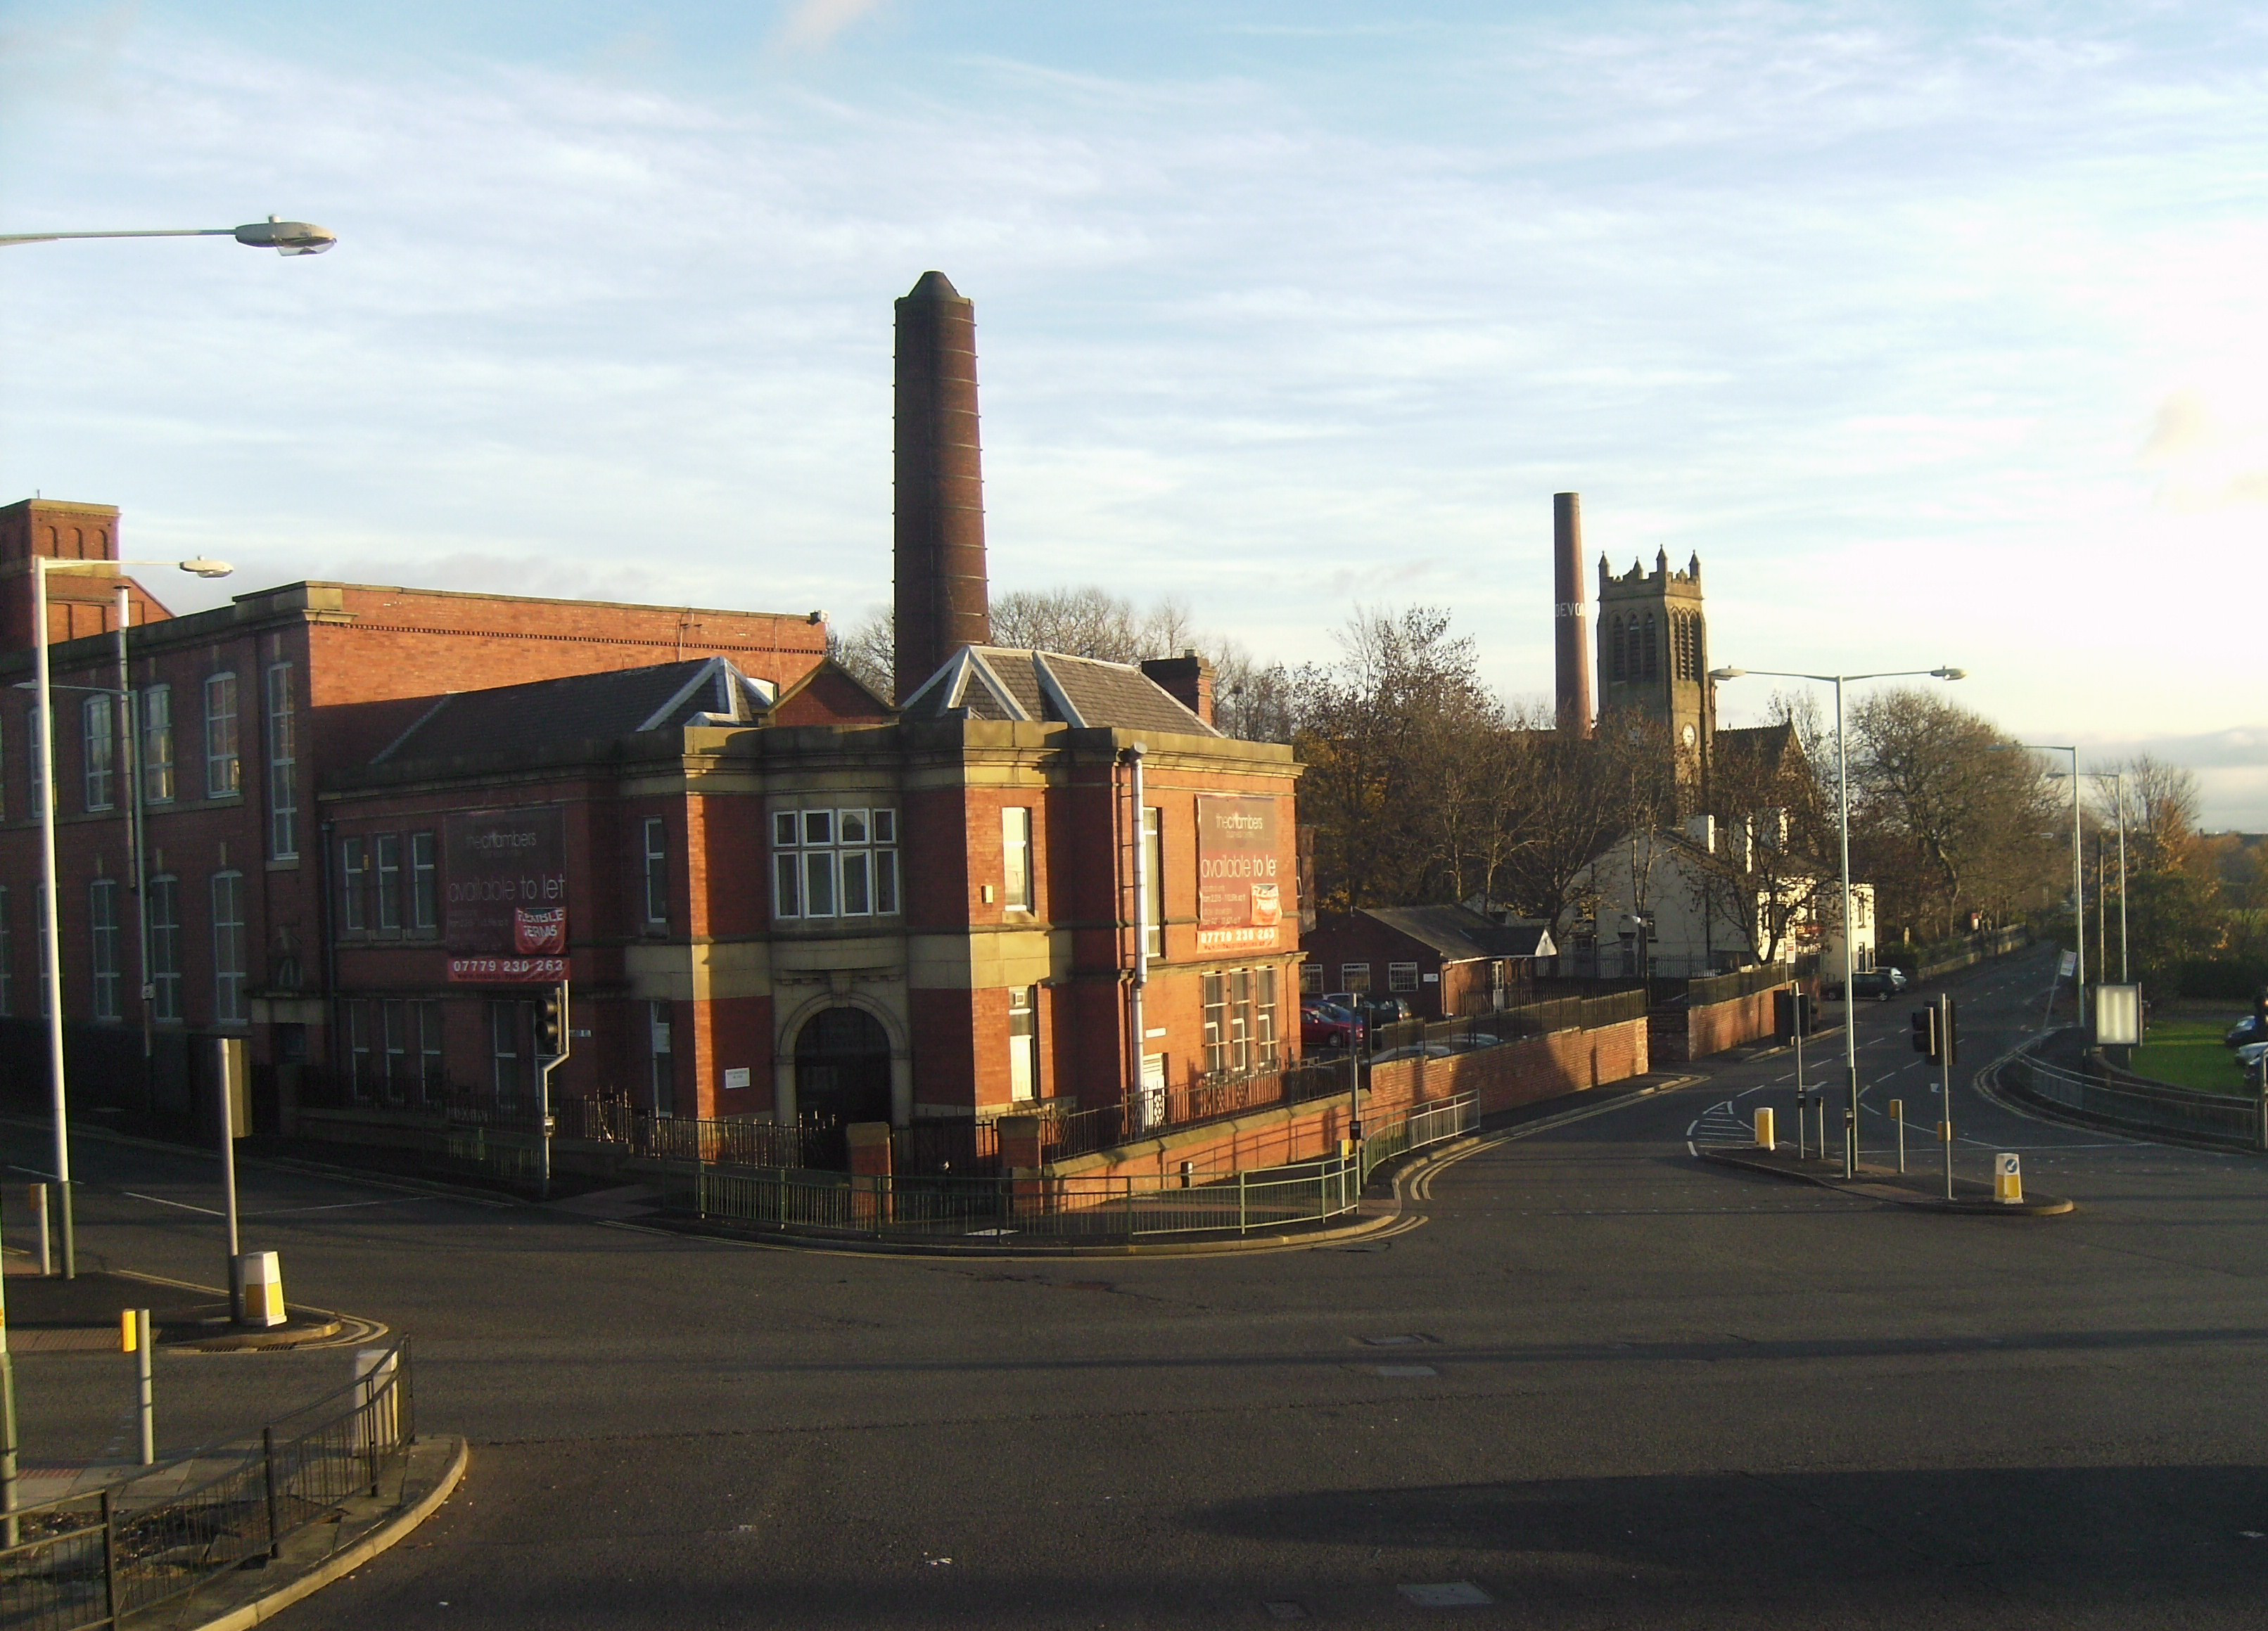 Hollinwood, Greater Manchester